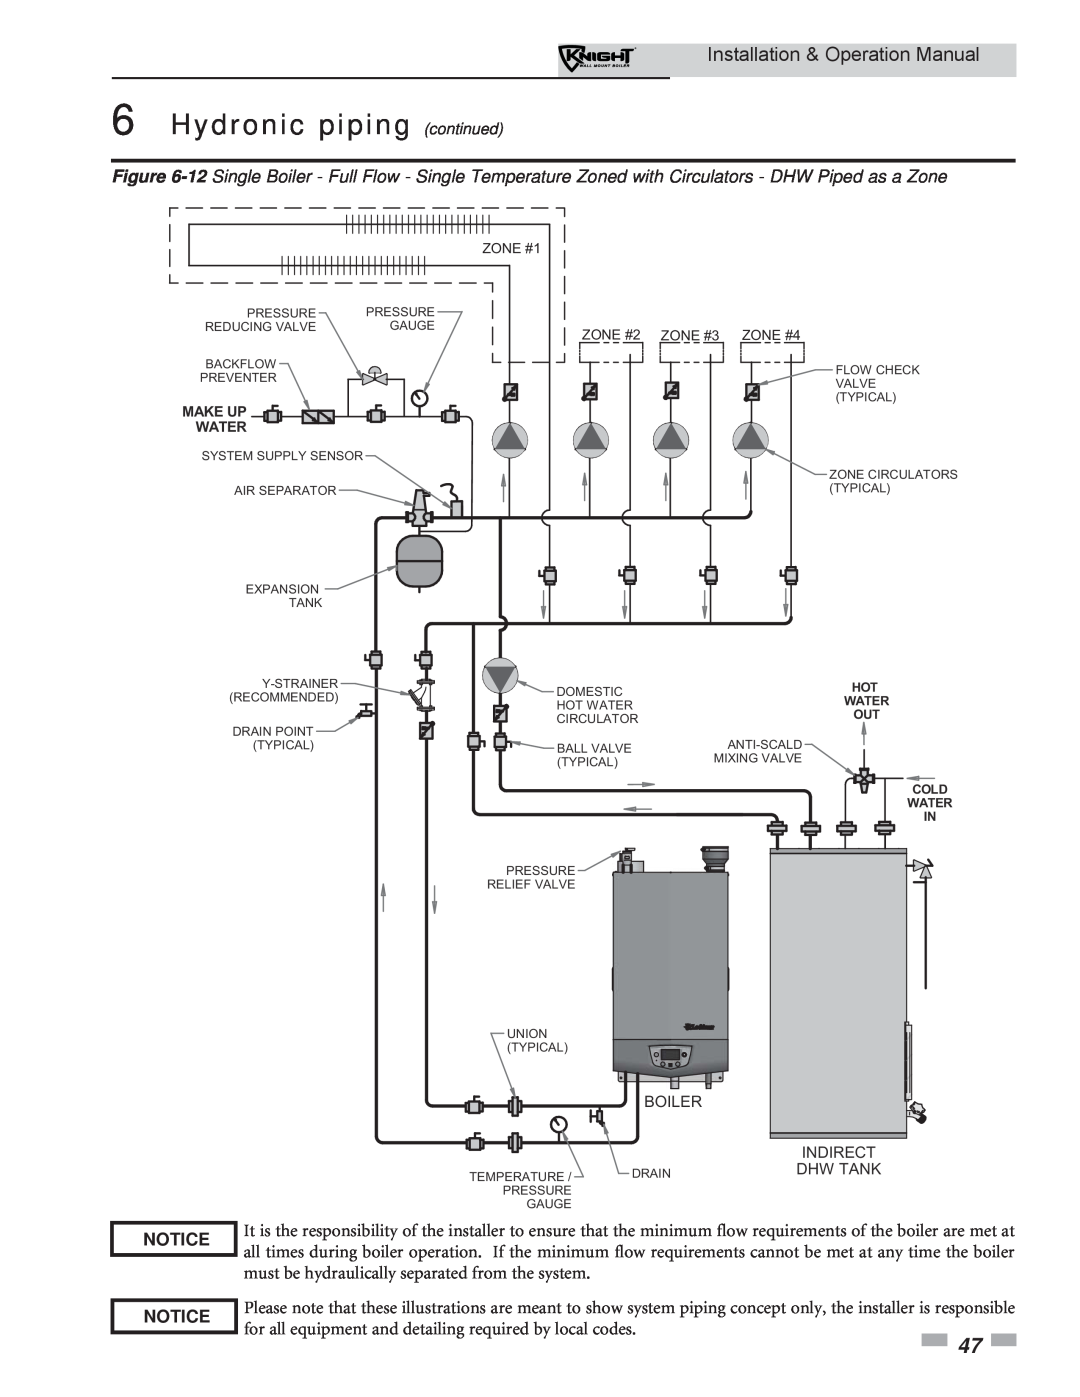 Lochinvar WH 55-399 Hydronic piping continued, Installation & Operation Manual, Notice Notice, Boiler, Cold Water In 